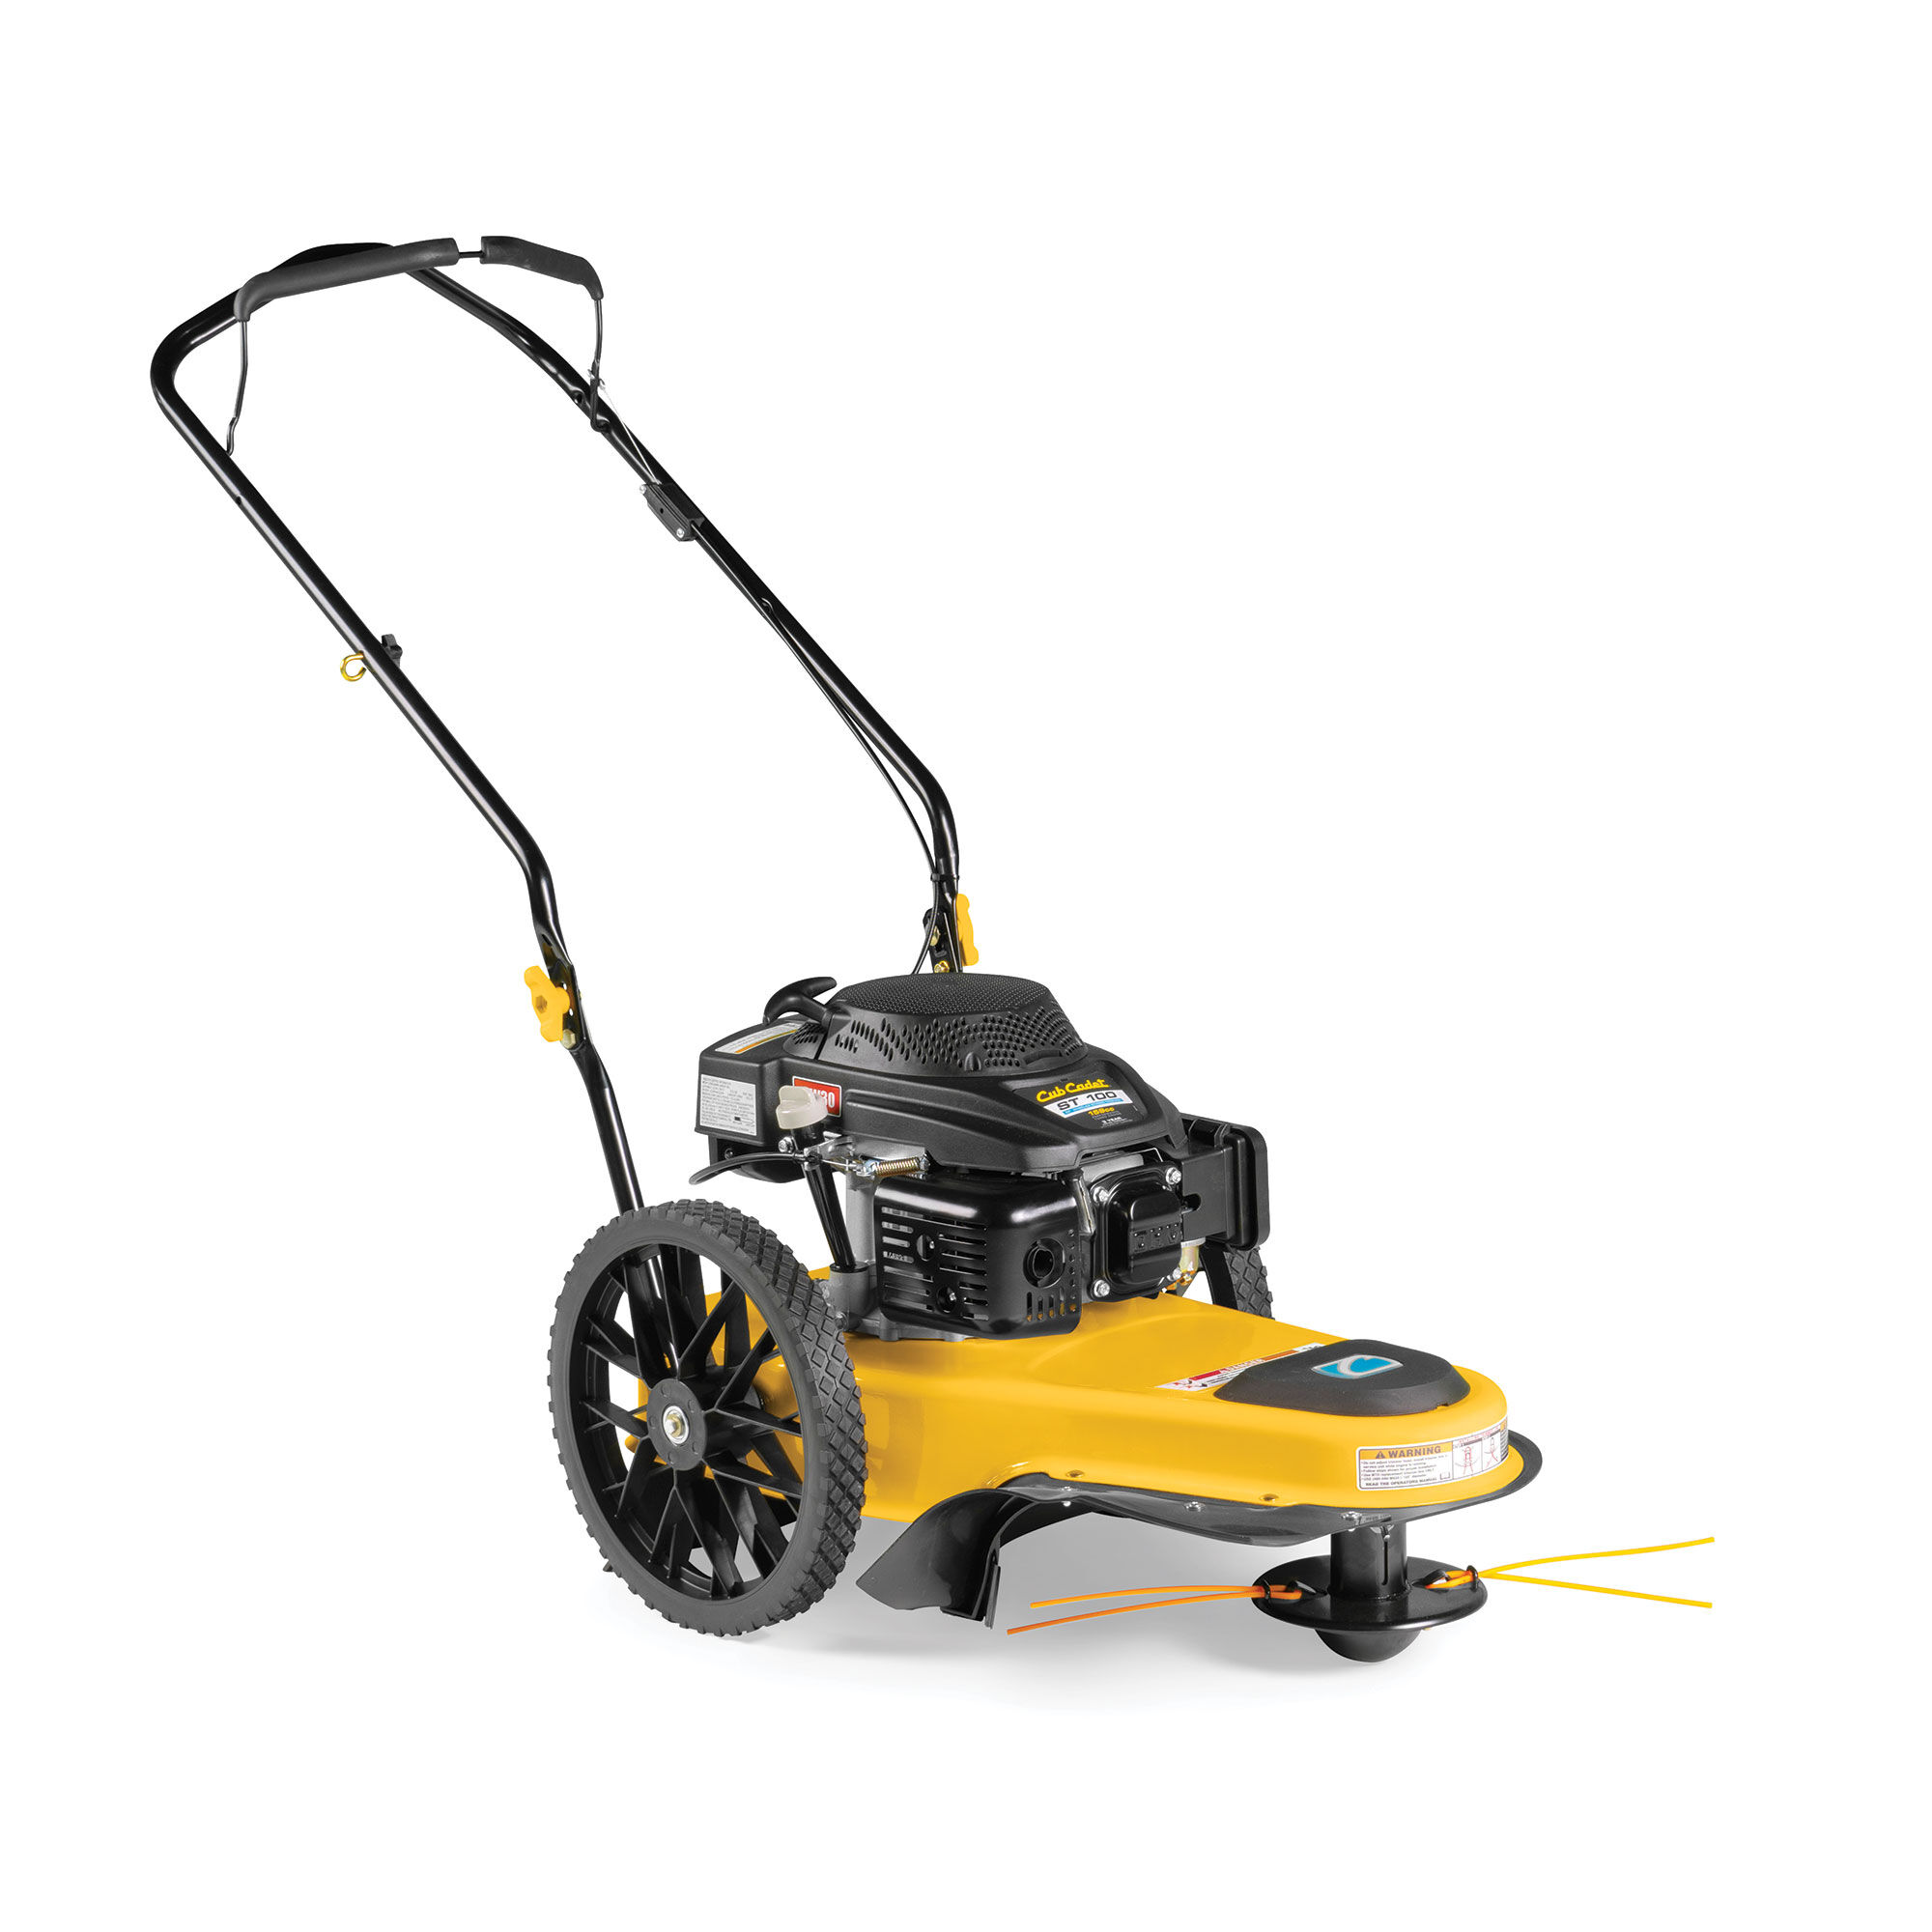 the lawn mower 2.0 waterproof electric trimmer